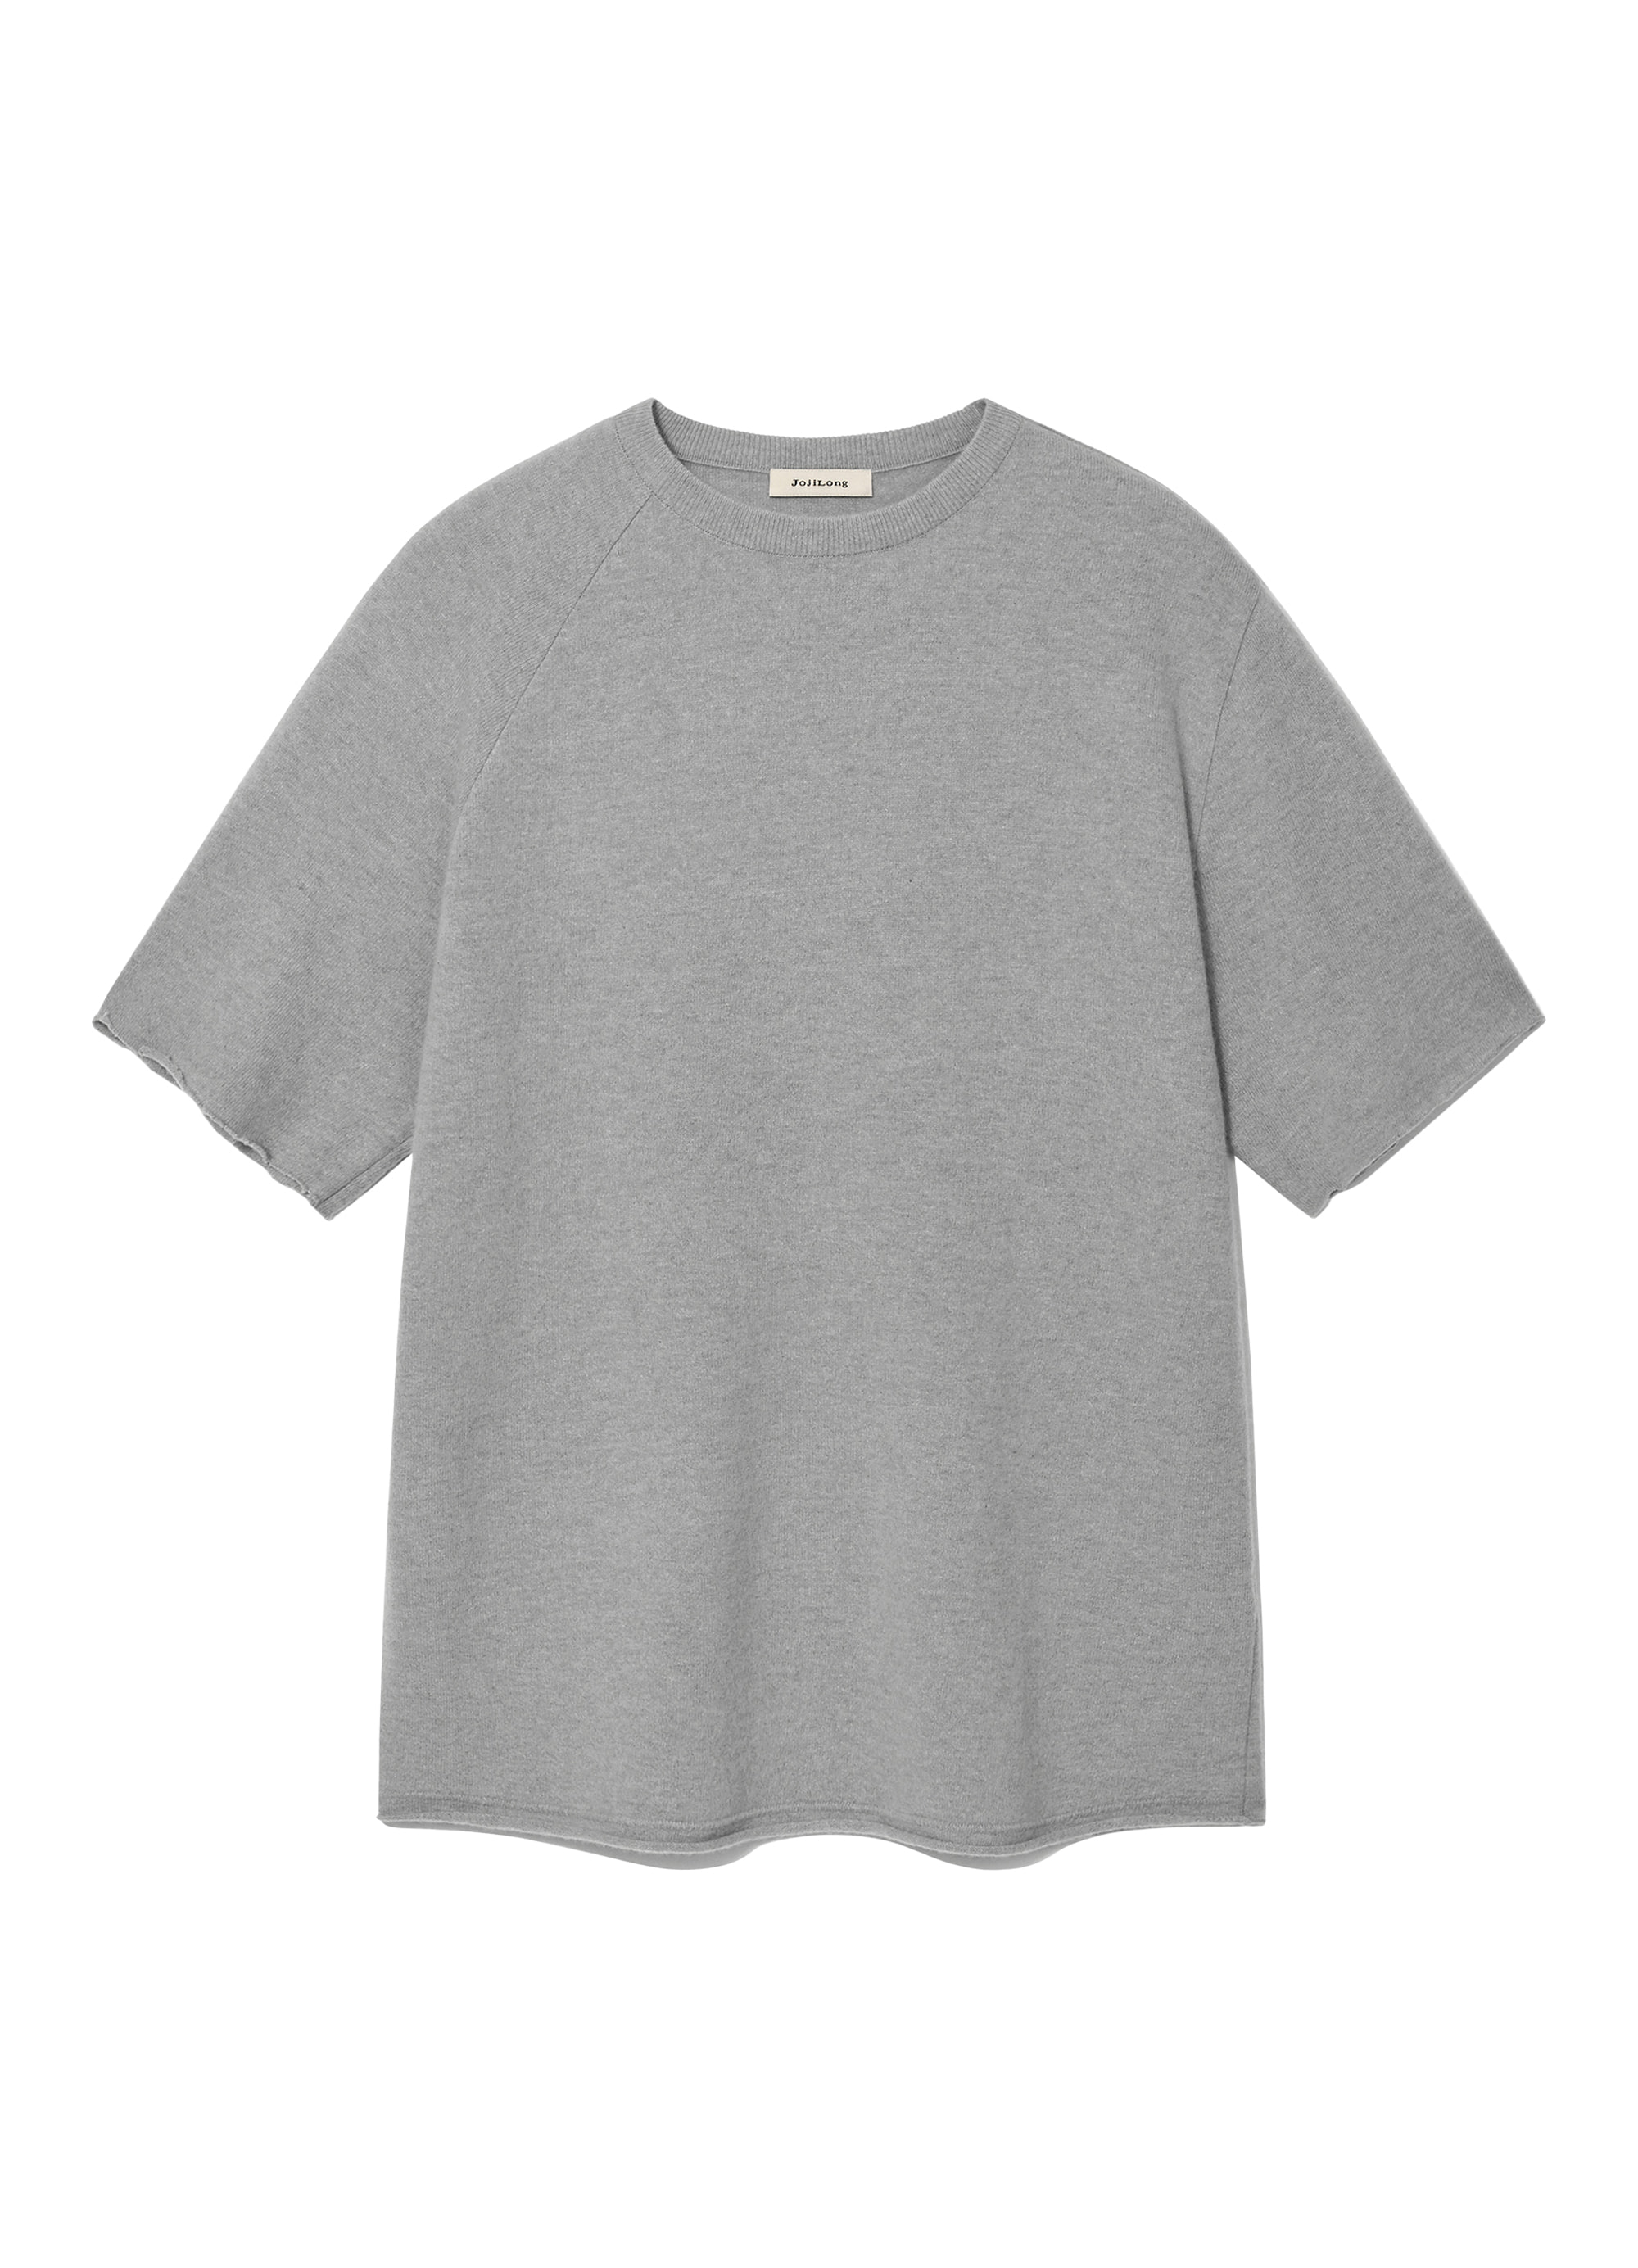 101 CASHMERE DISTRESSED SLEEVE KNIT - GREY